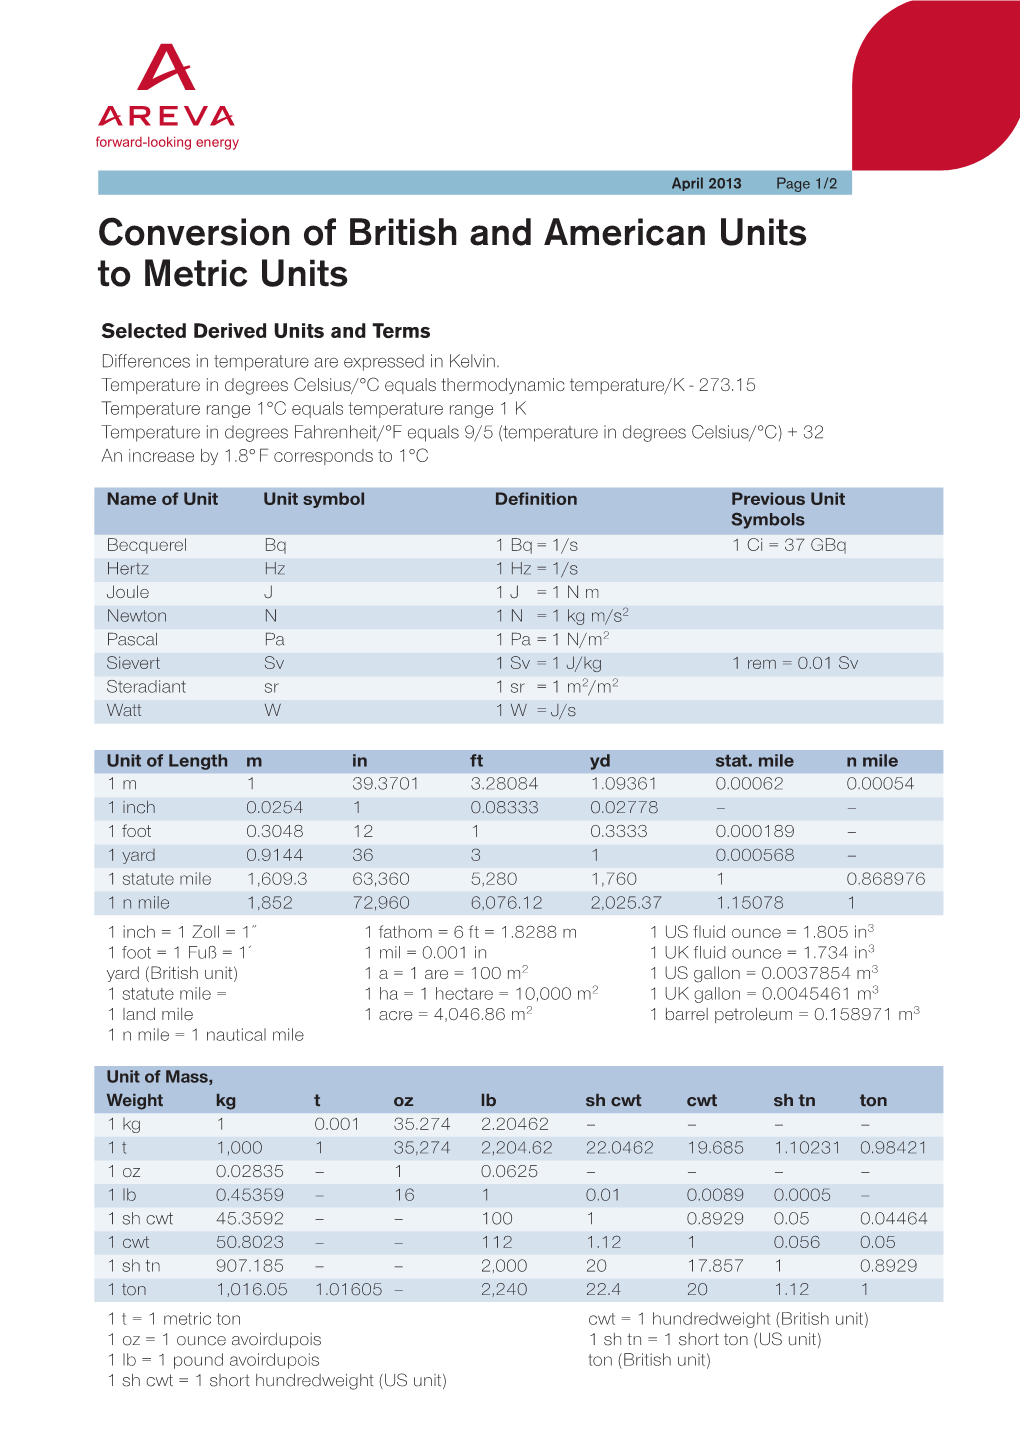 Conversion of British and American Units to Metric Units